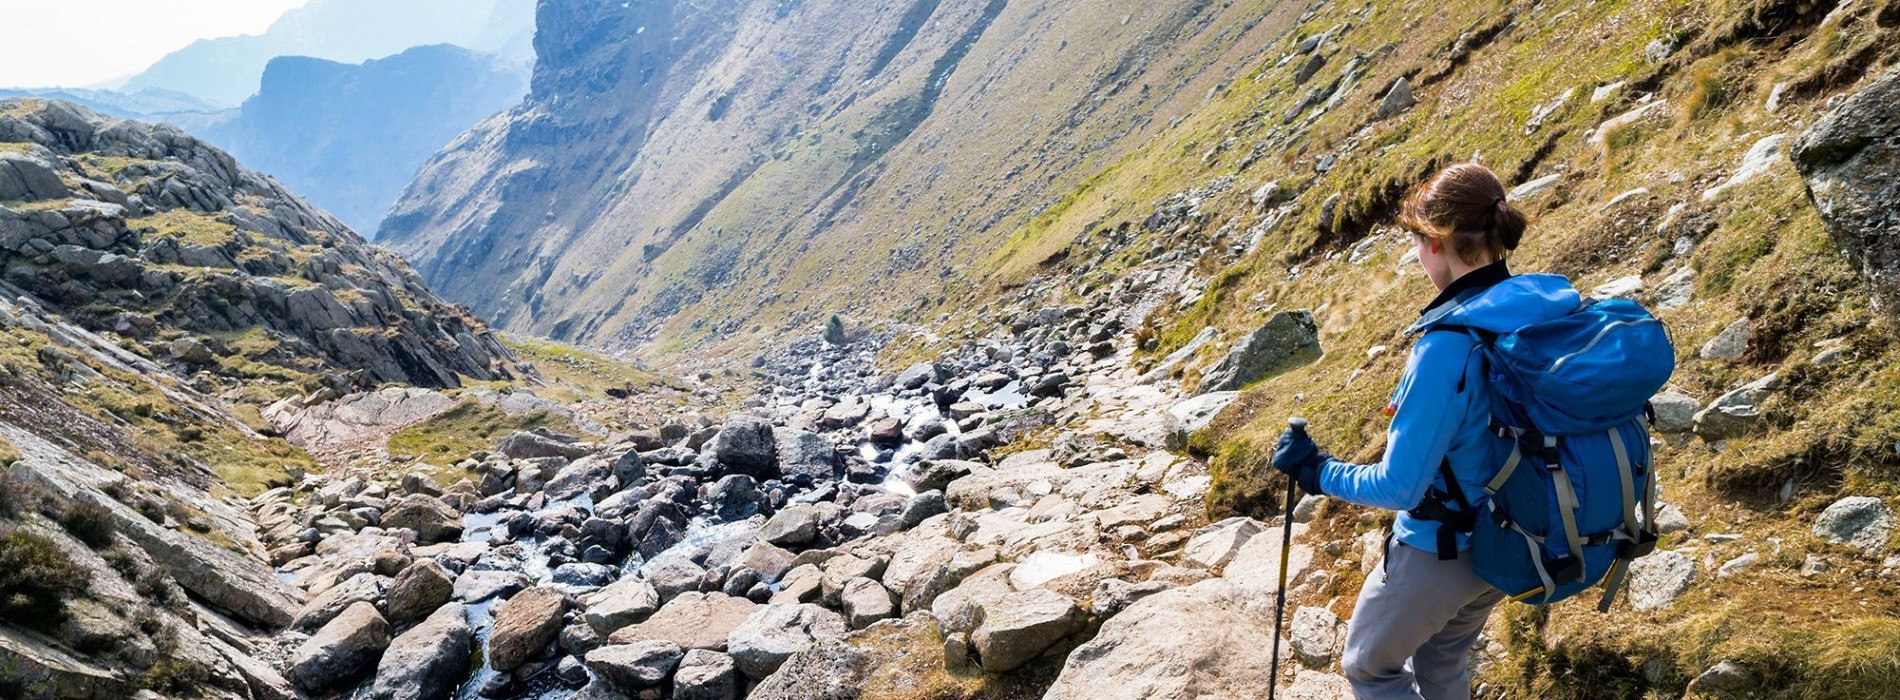 Trekking with poles over rocks in the Lake District